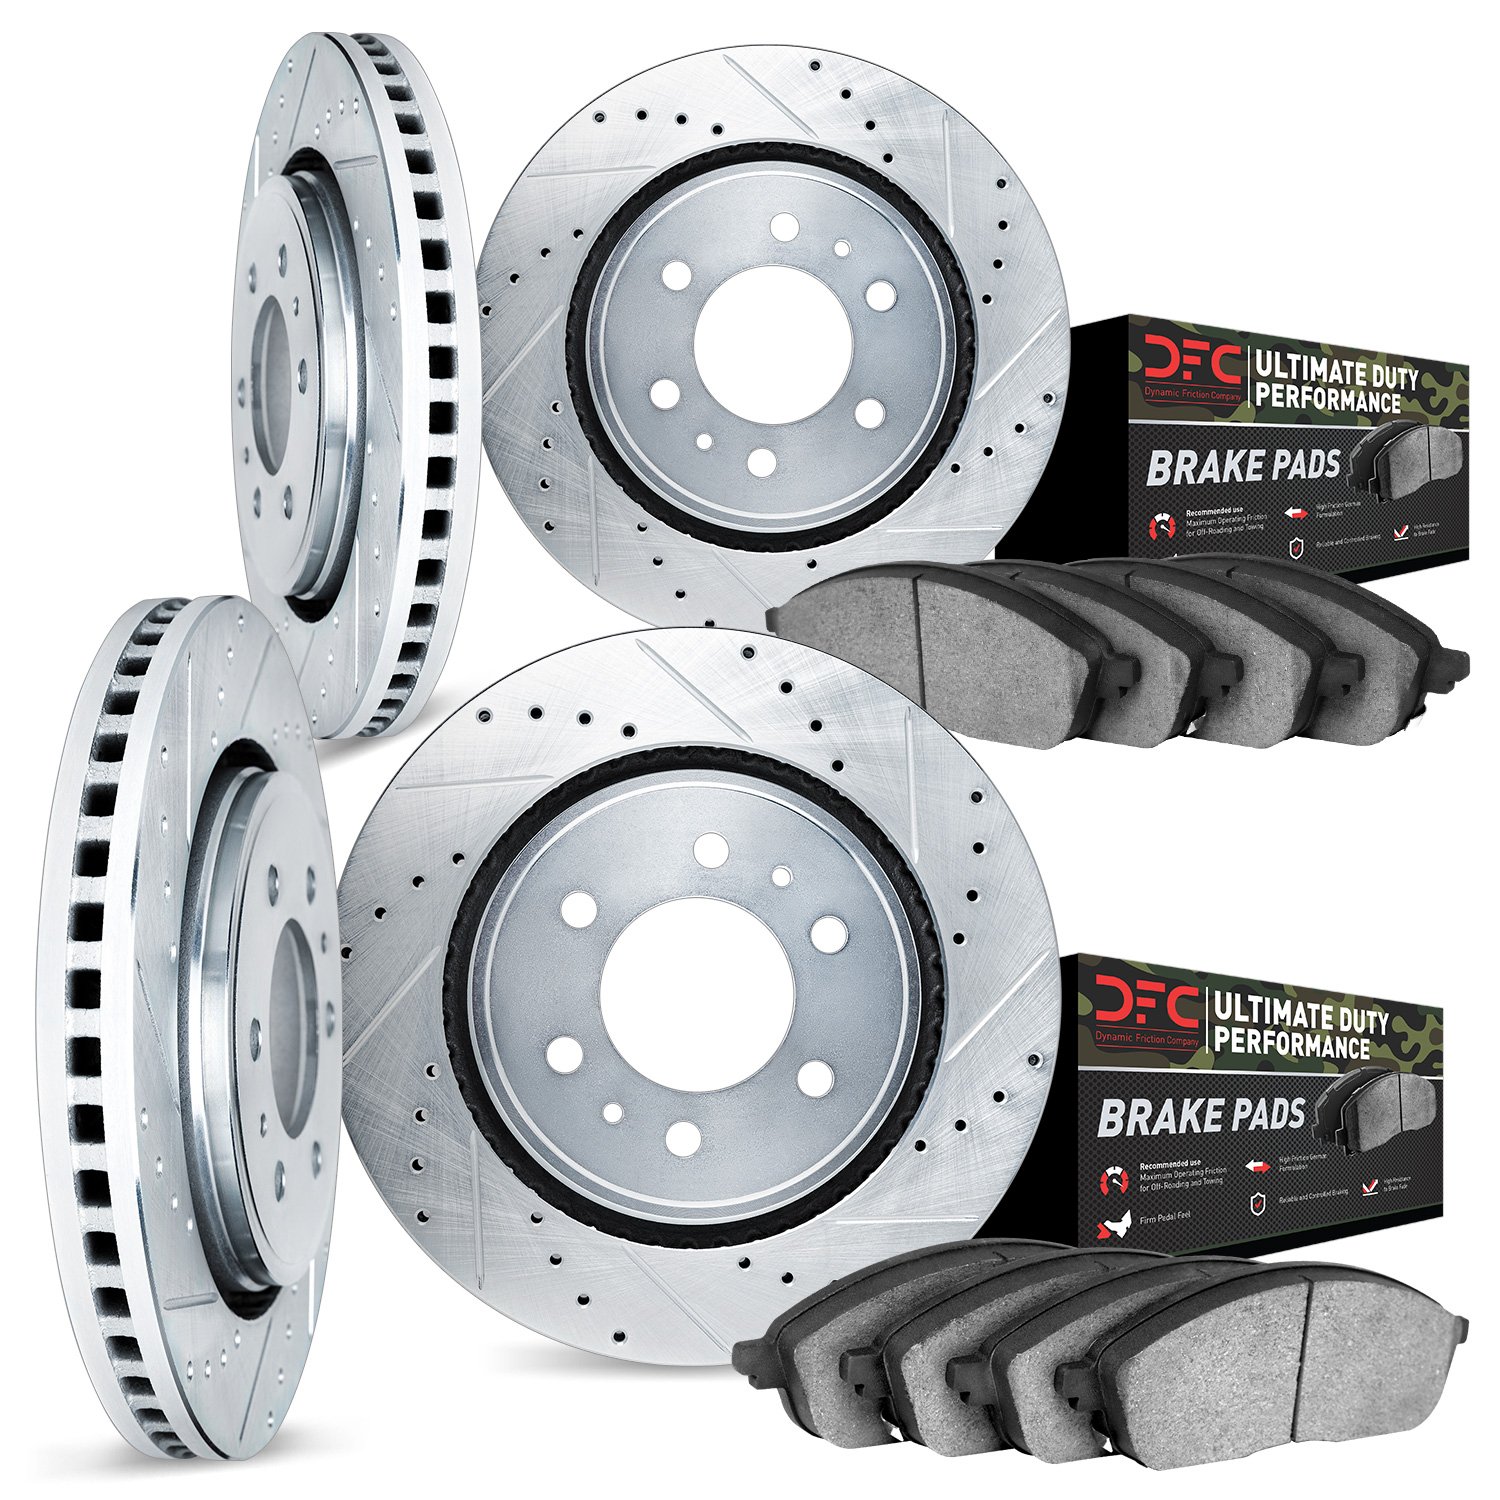 7404-76002 Drilled/Slotted Brake Rotors with Ultimate-Duty Brake Pads Kit [Silver], 2001-2007 Lexus/Toyota/Scion, Position: Fron